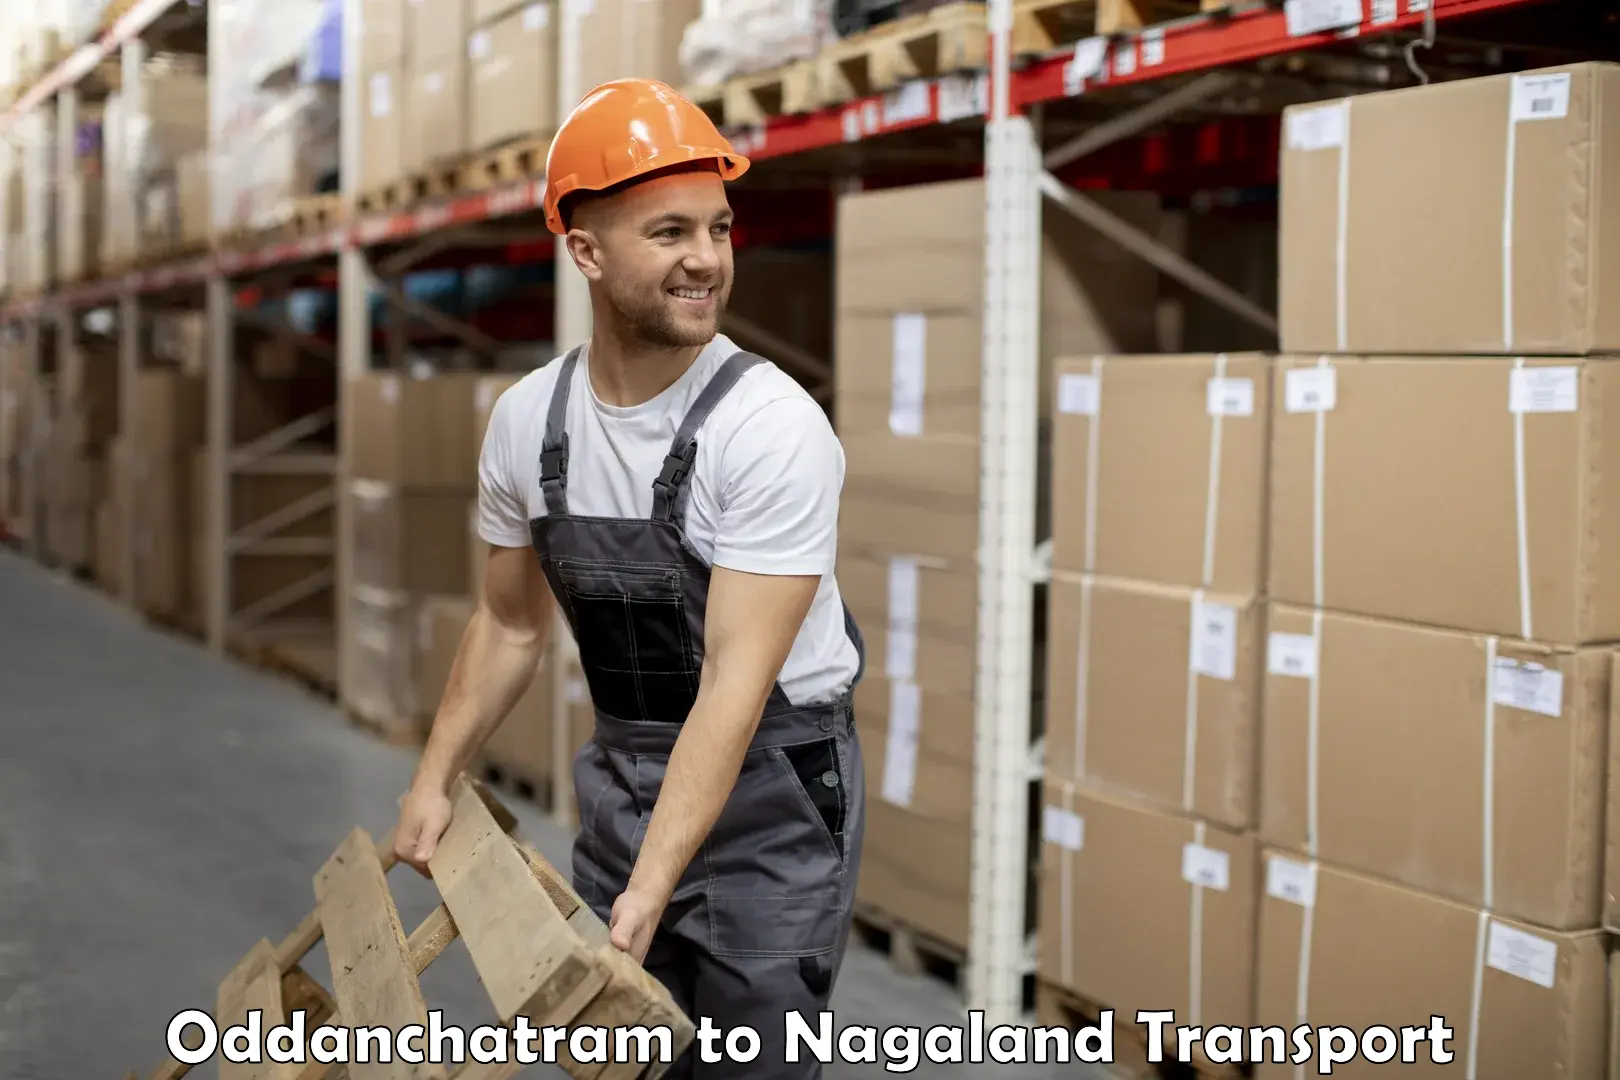 Air freight transport services Oddanchatram to Nagaland